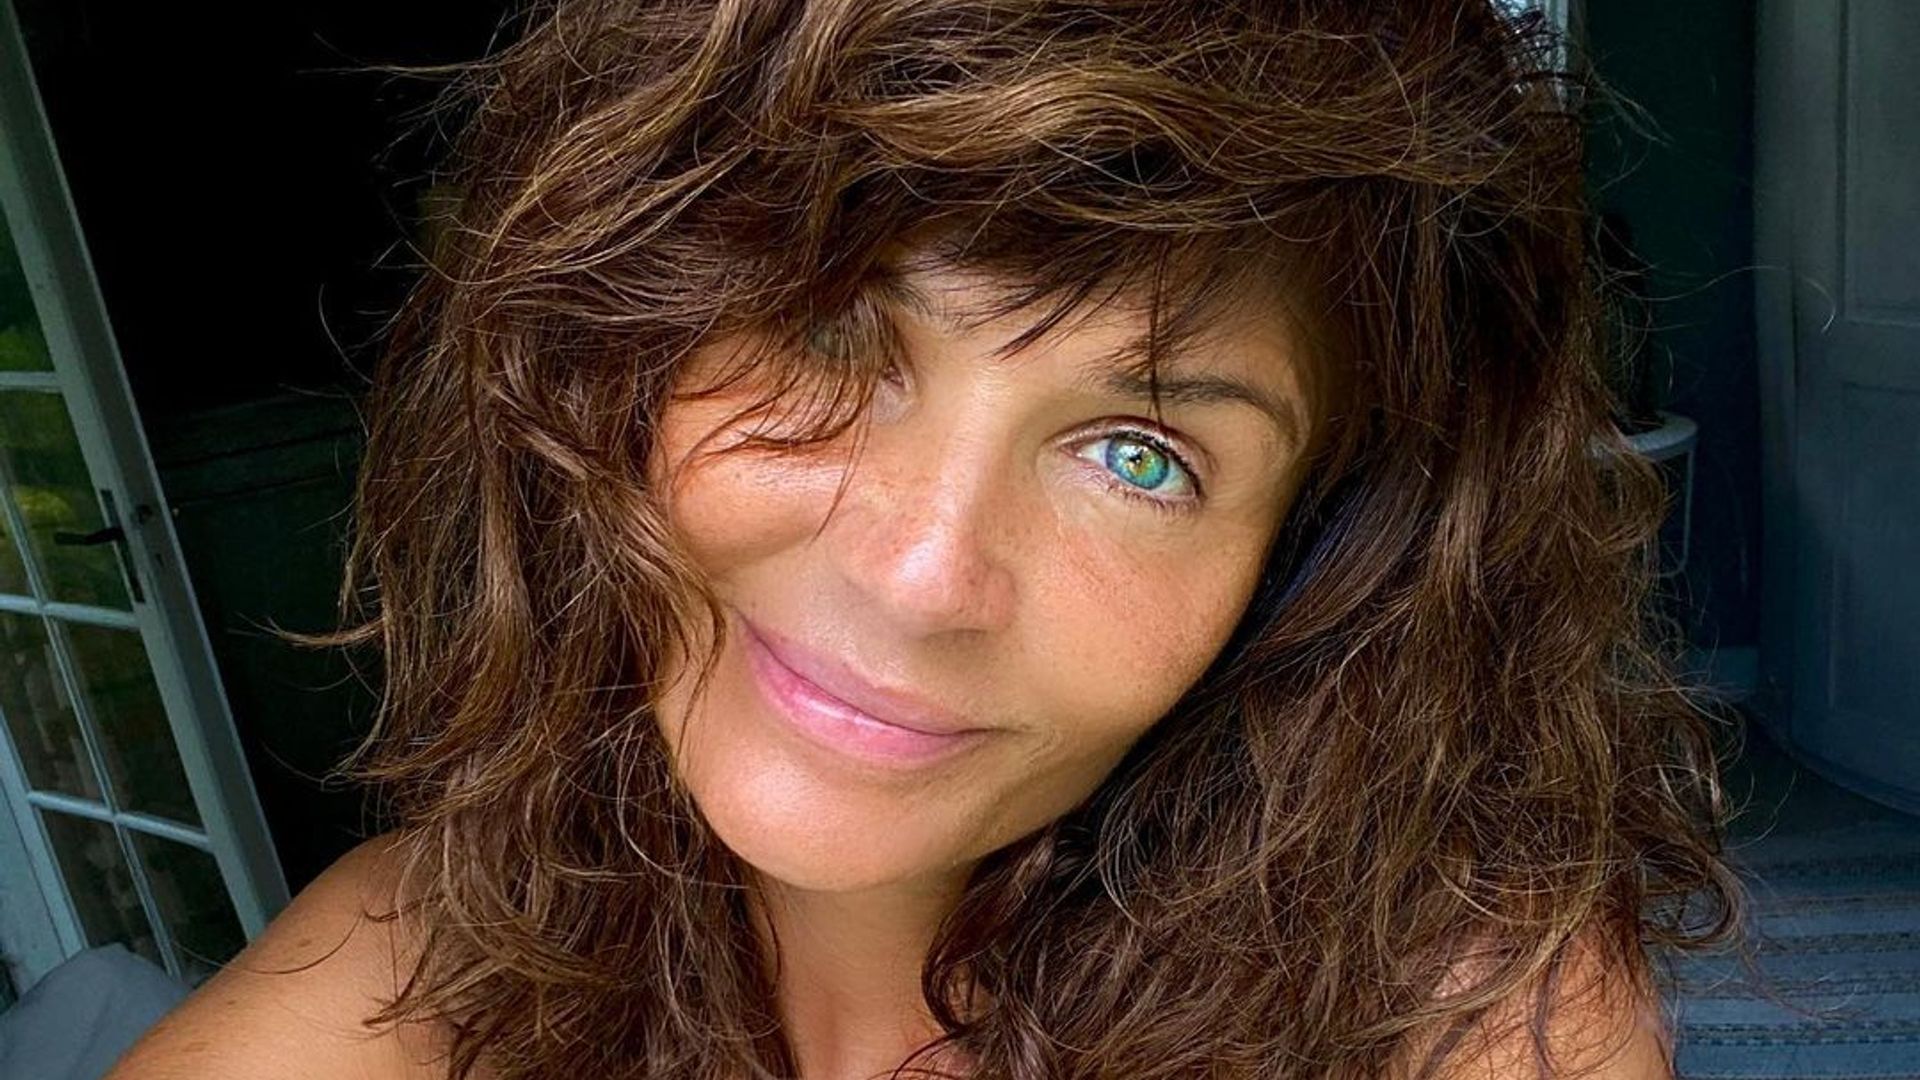 Helena Christensen's son Mingus looks just like dad Norman Reedus in special family video